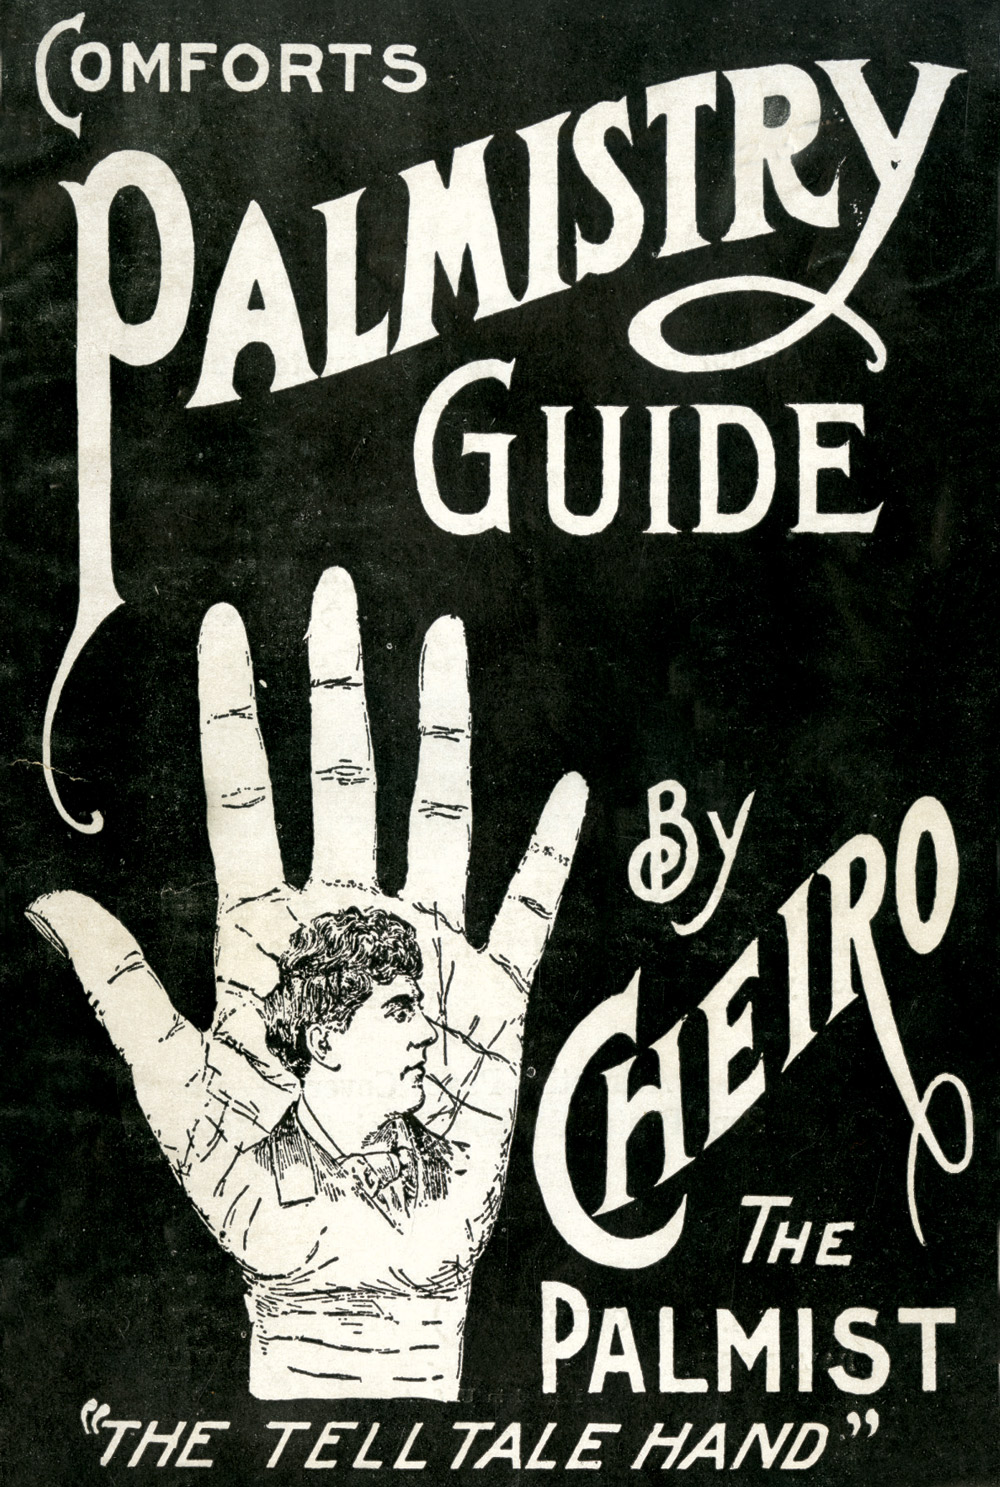 The illustrated cover of Cheiro’s nineteen hundred “Comforts Palmistry Guide,” depicting a man’s head in the palm of a hand. 